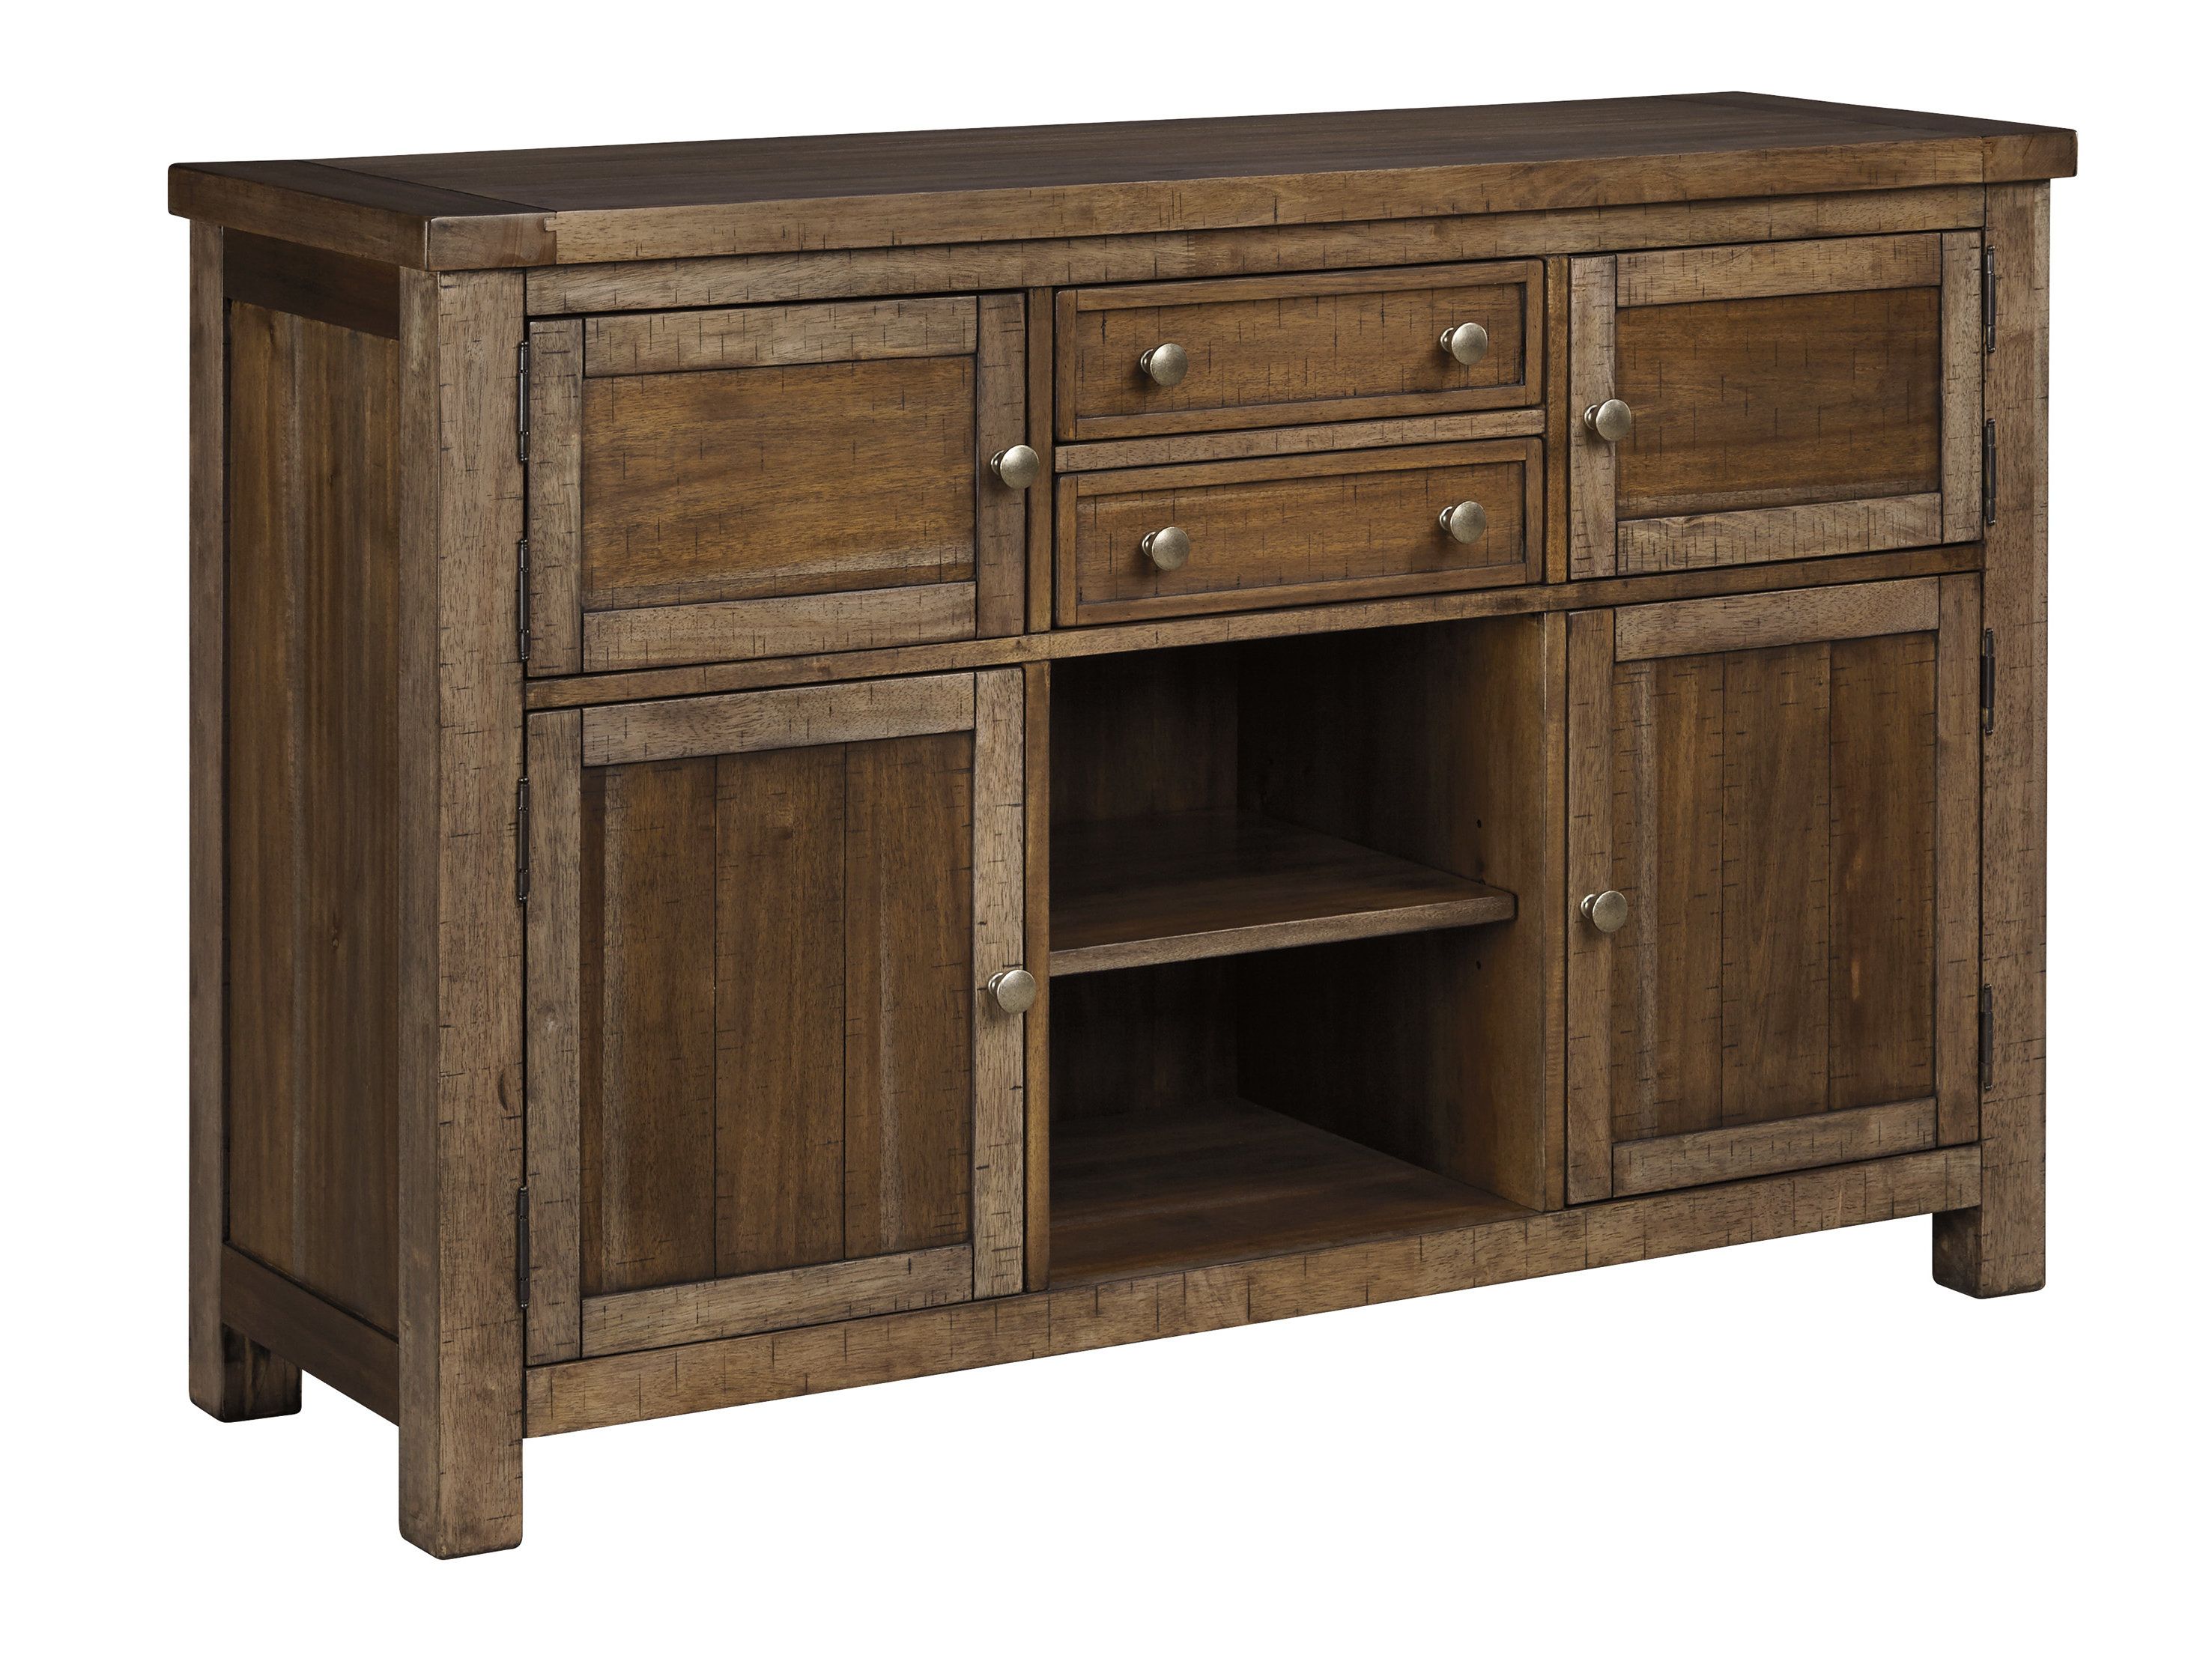 Hillary Dining Room Buffet Table Throughout 2018 Filkins Sideboards (View 11 of 20)